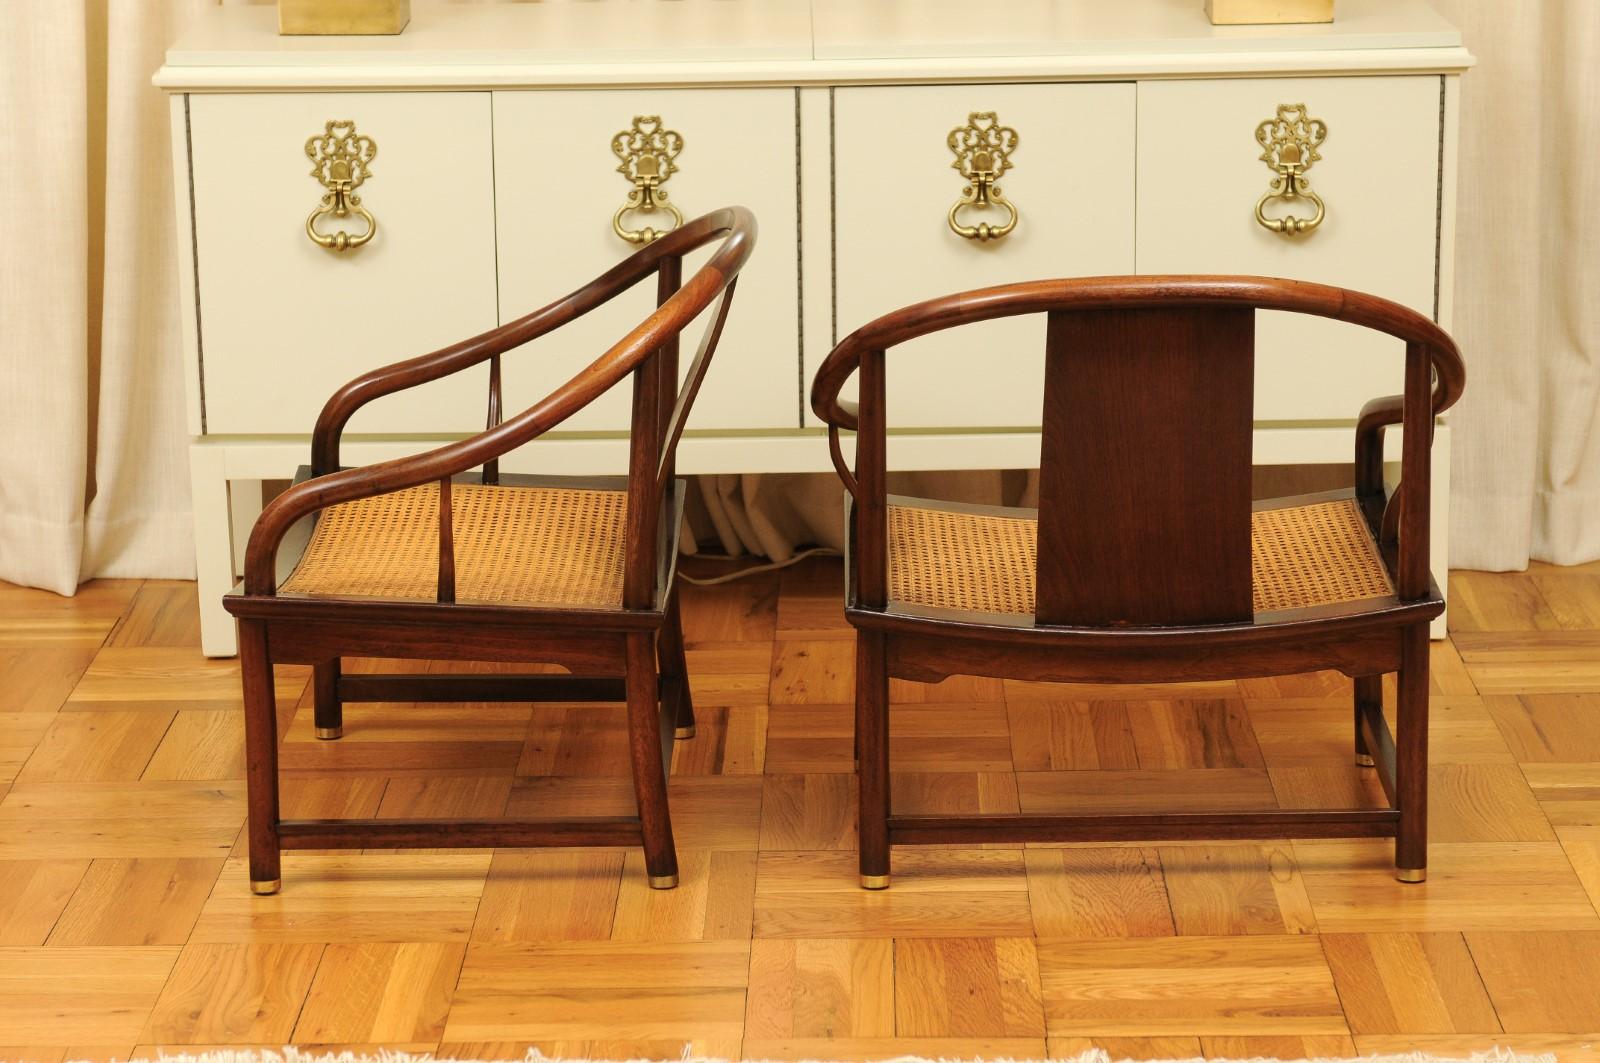 Stunning Restored Pair of Walnut Cane Loungers by Michael Taylor, circa 1960 For Sale 8